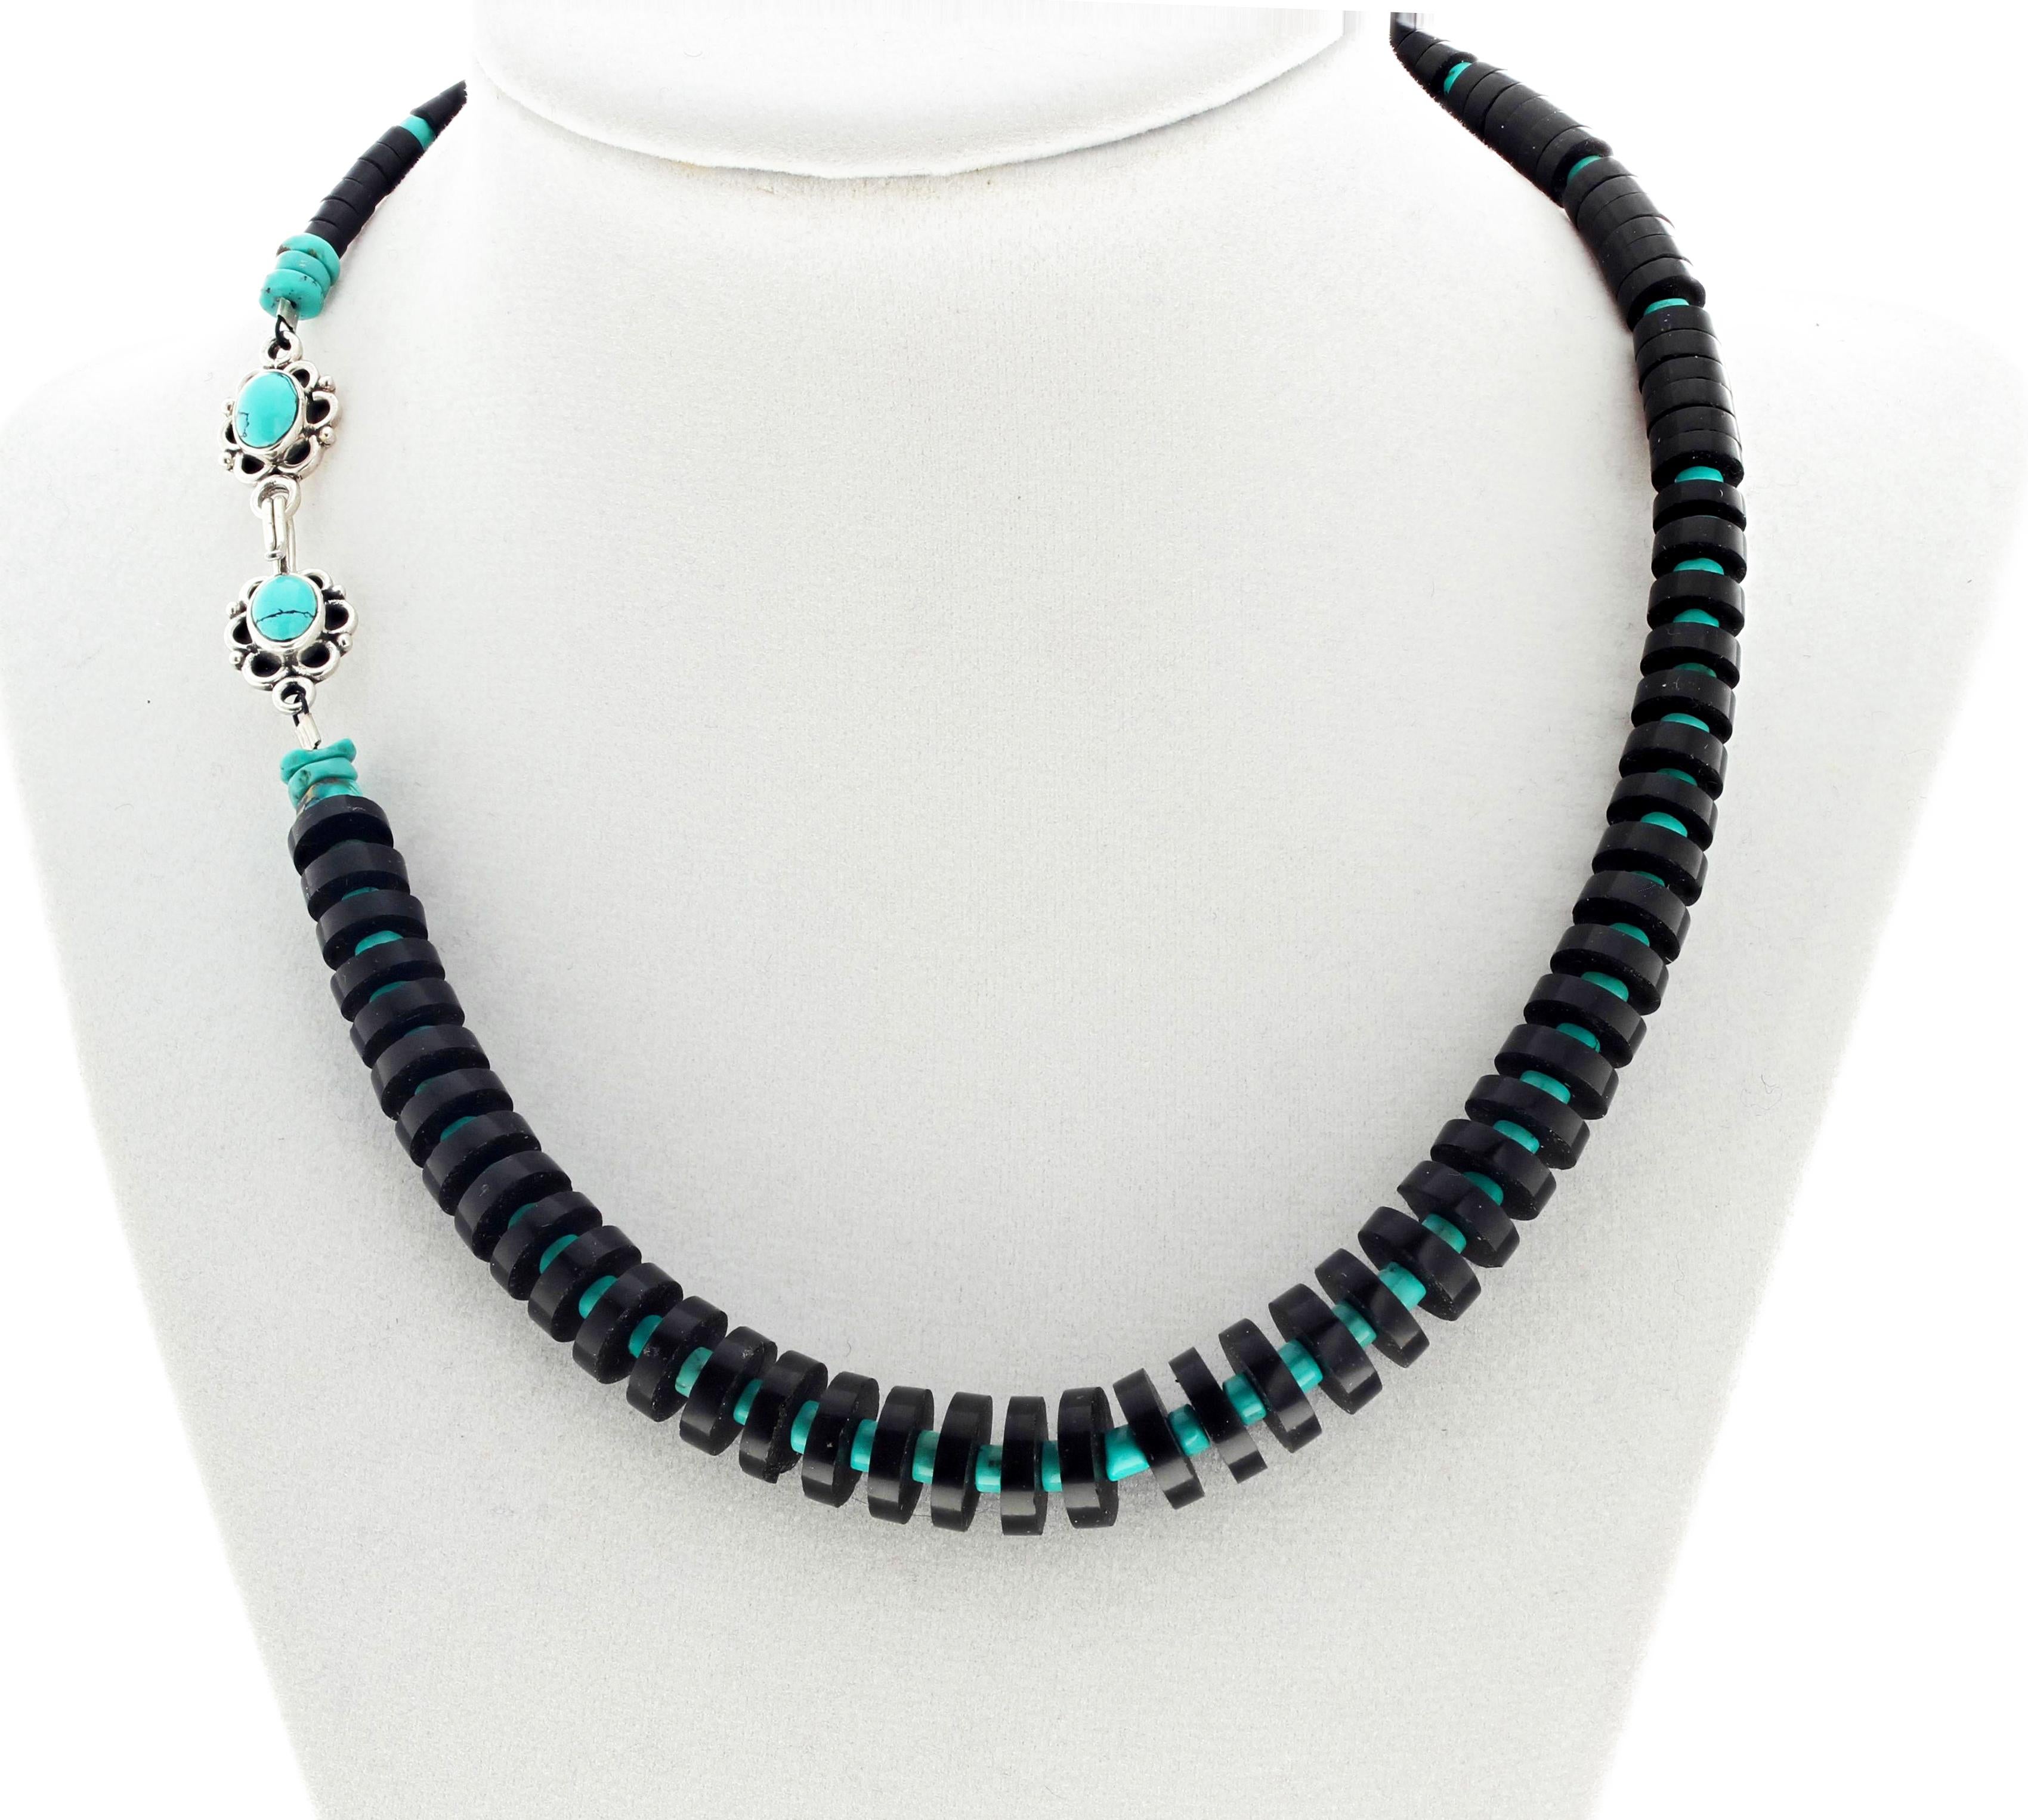 Jet Stone is also called Black Amber, Lignite, and Gem Lignite and its a highly polished shining black gemstone set with Turquoise rondels.  The largest Jet is 11 mm across and is 17 inches long.  This is set in an irregular handmade design to give